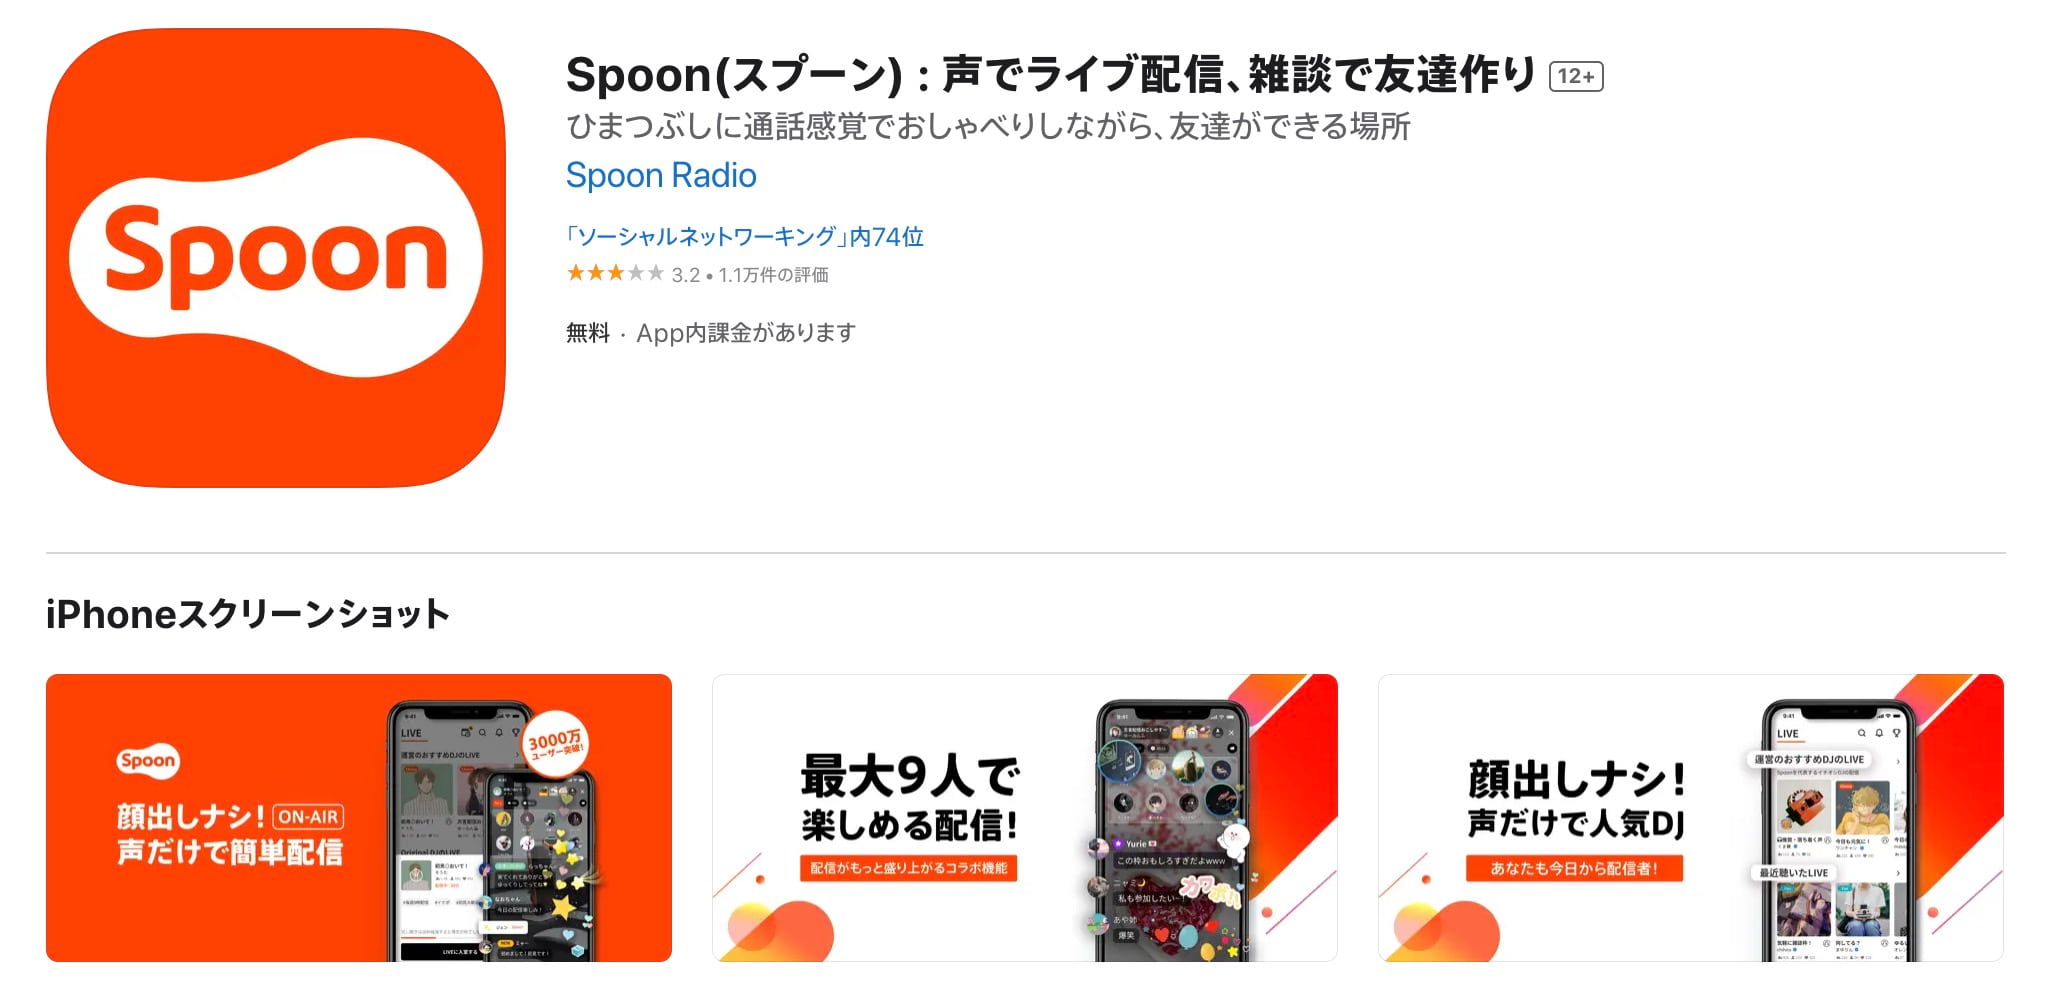 Spoon（スプーン）